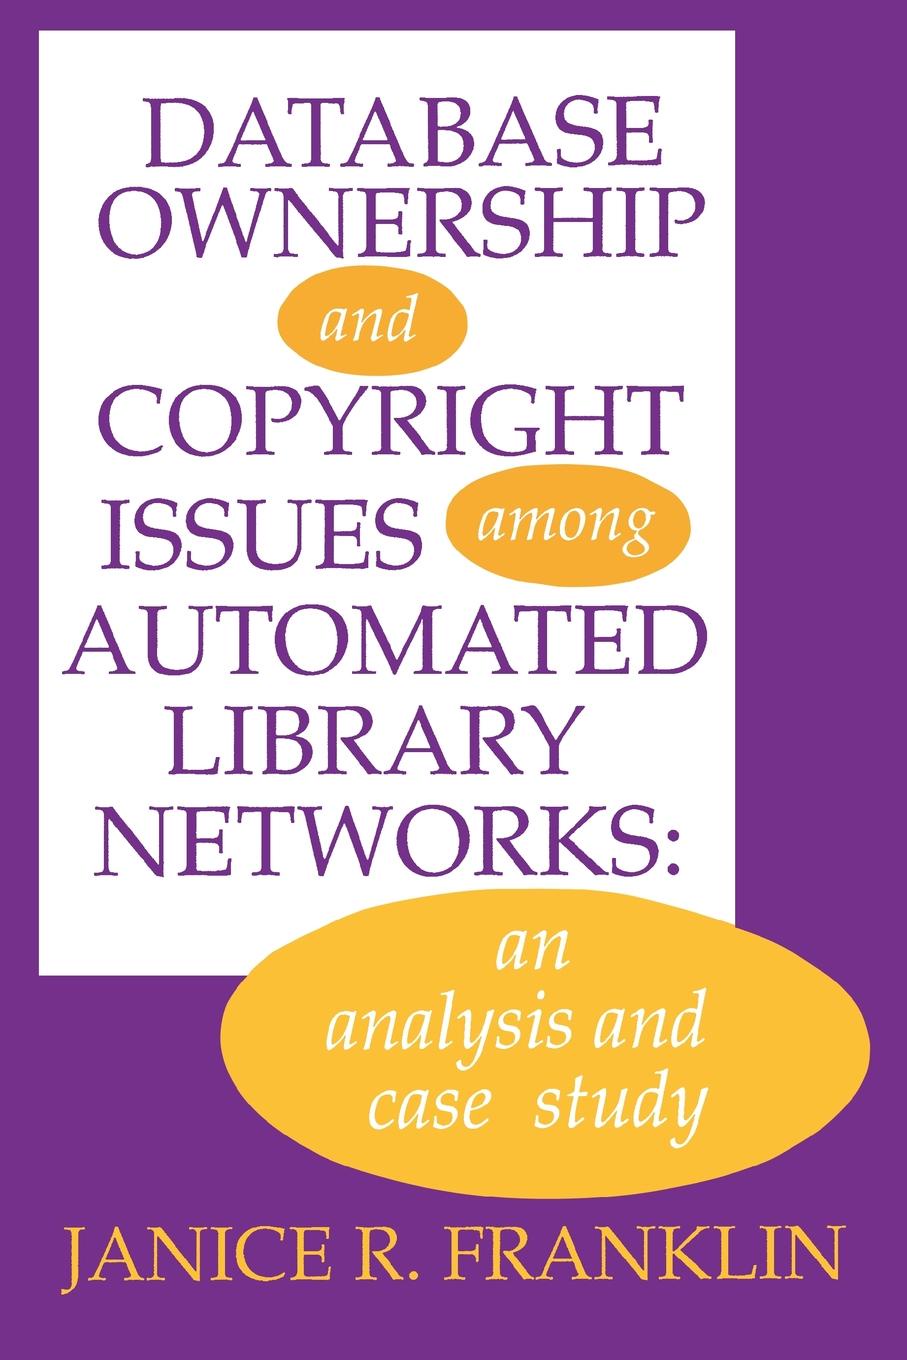 Database Ownership and Copyright Issues Among Automated Library Networks. An Analysis and Case Study